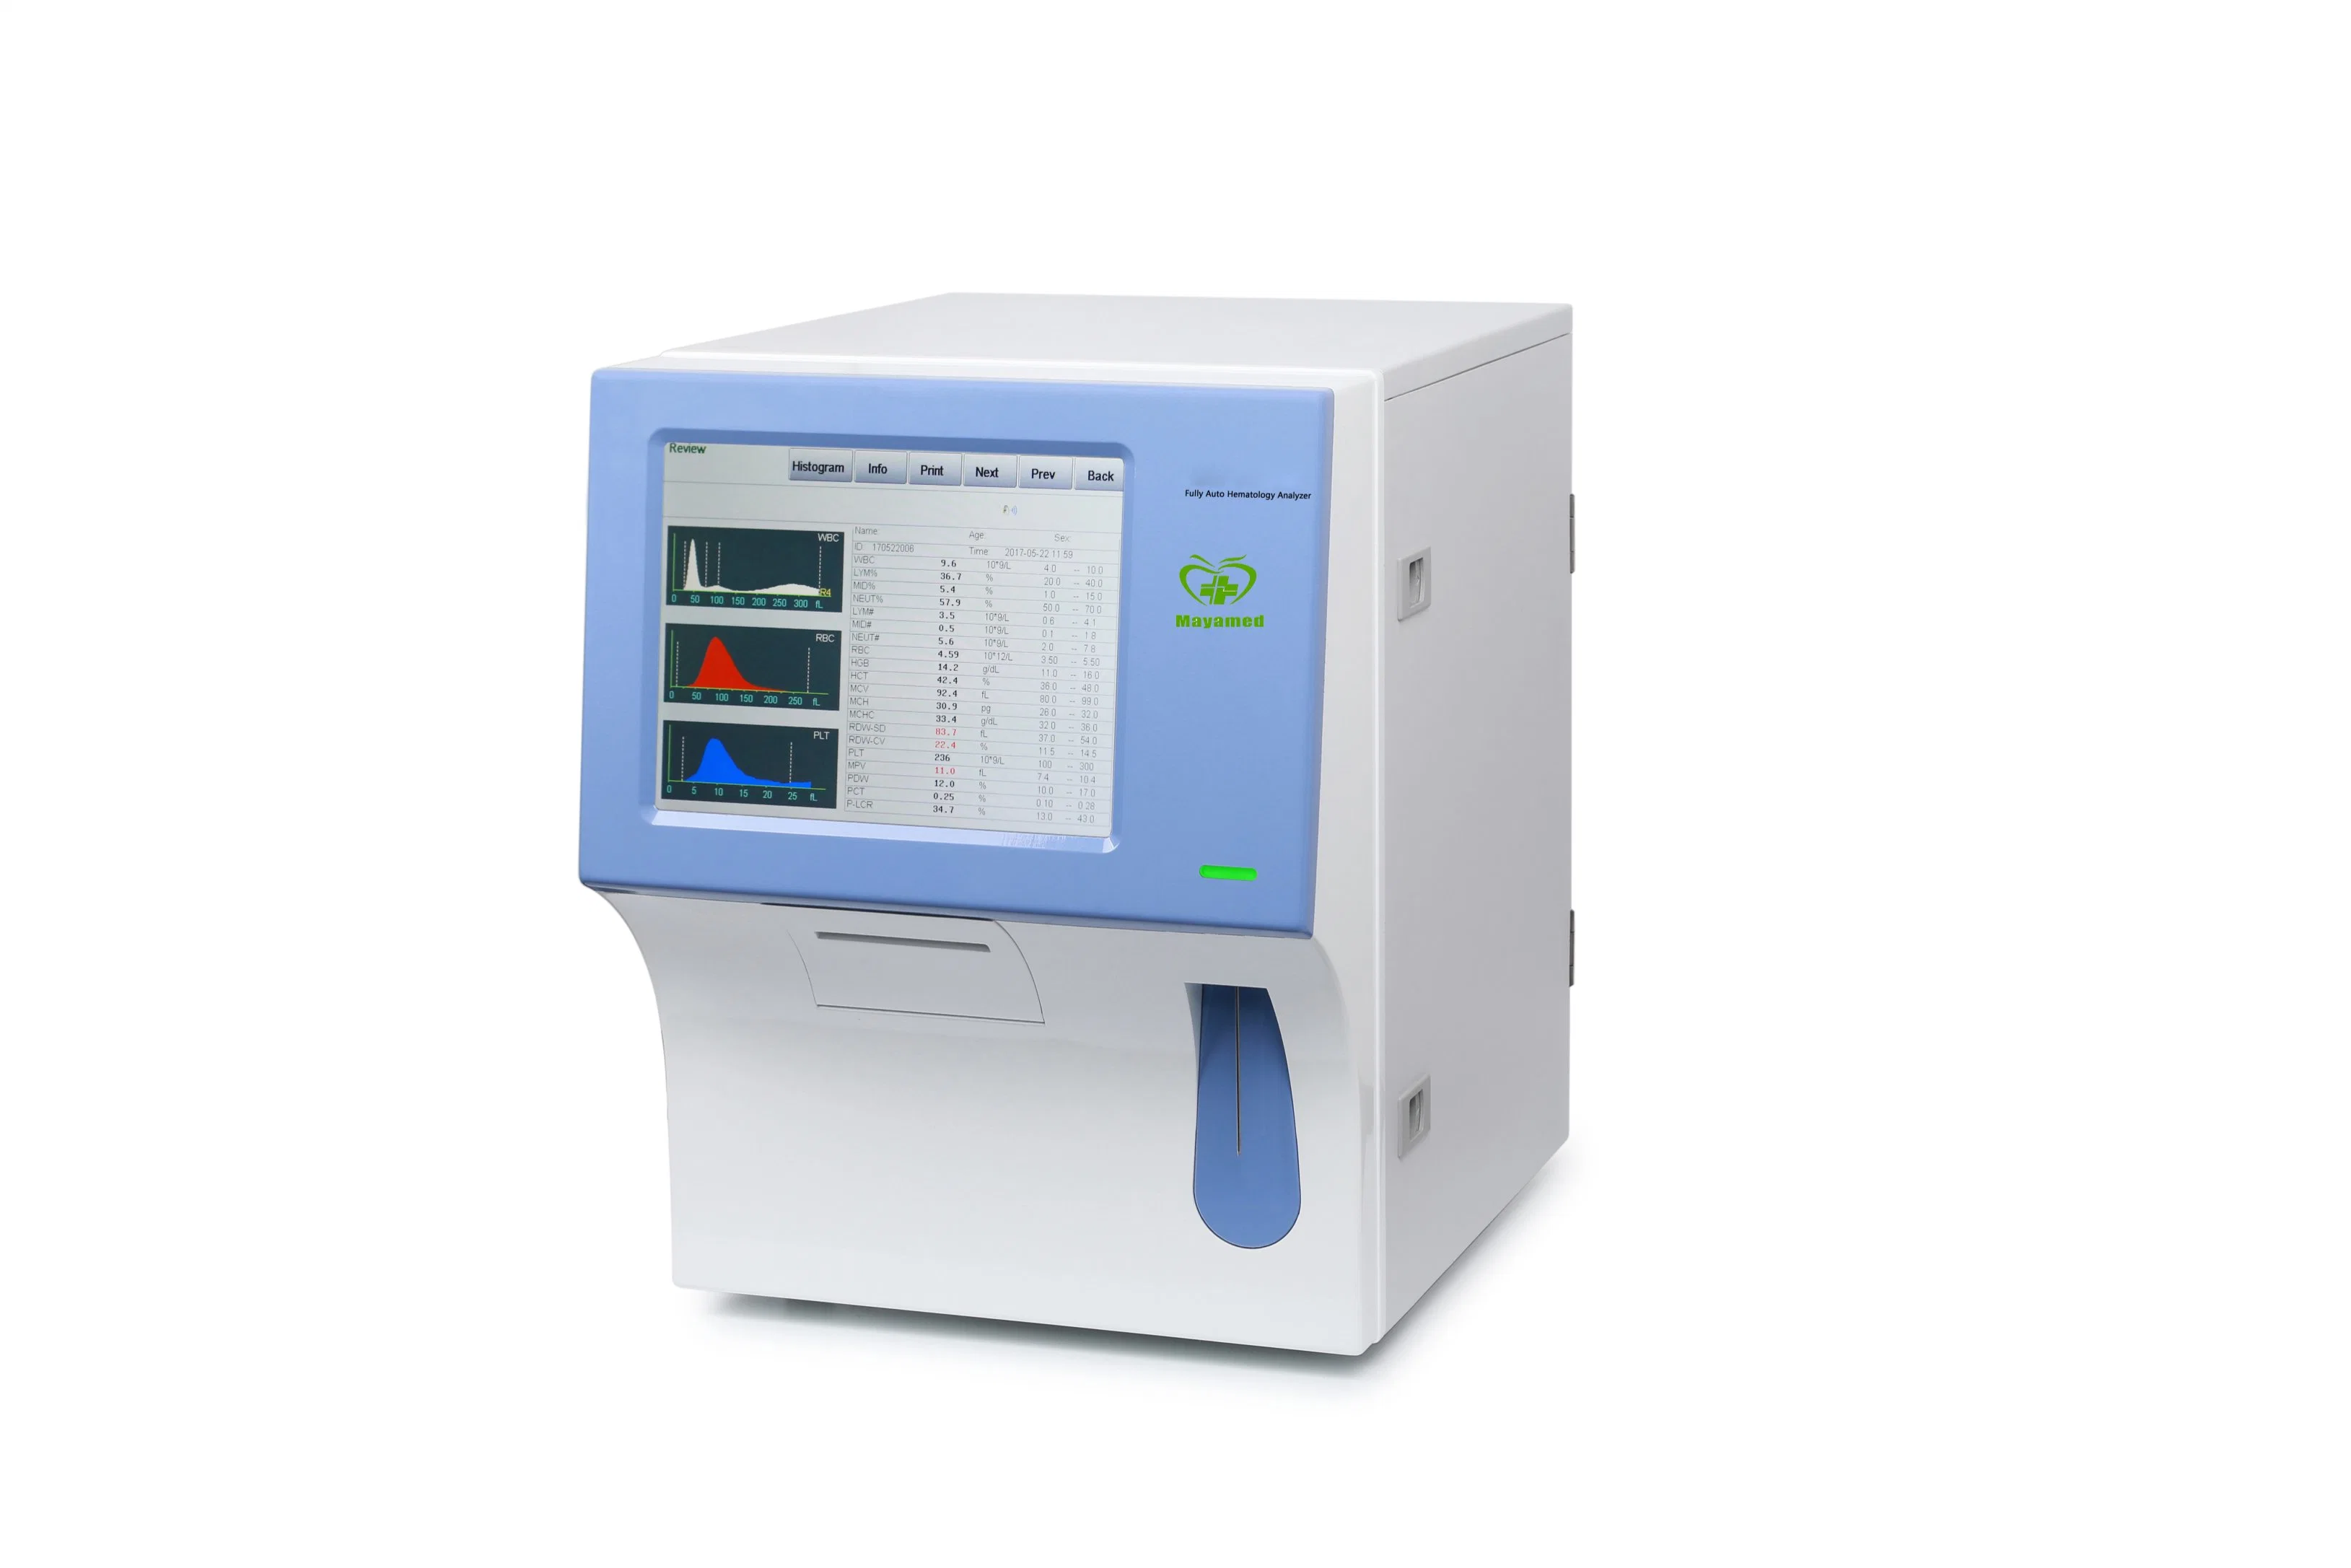 My-B002b-1 Clinical Analytical Equipment Blood Testing 10.4 Inch Color Touch Screen Fully Auto Hematology Analyzer Price